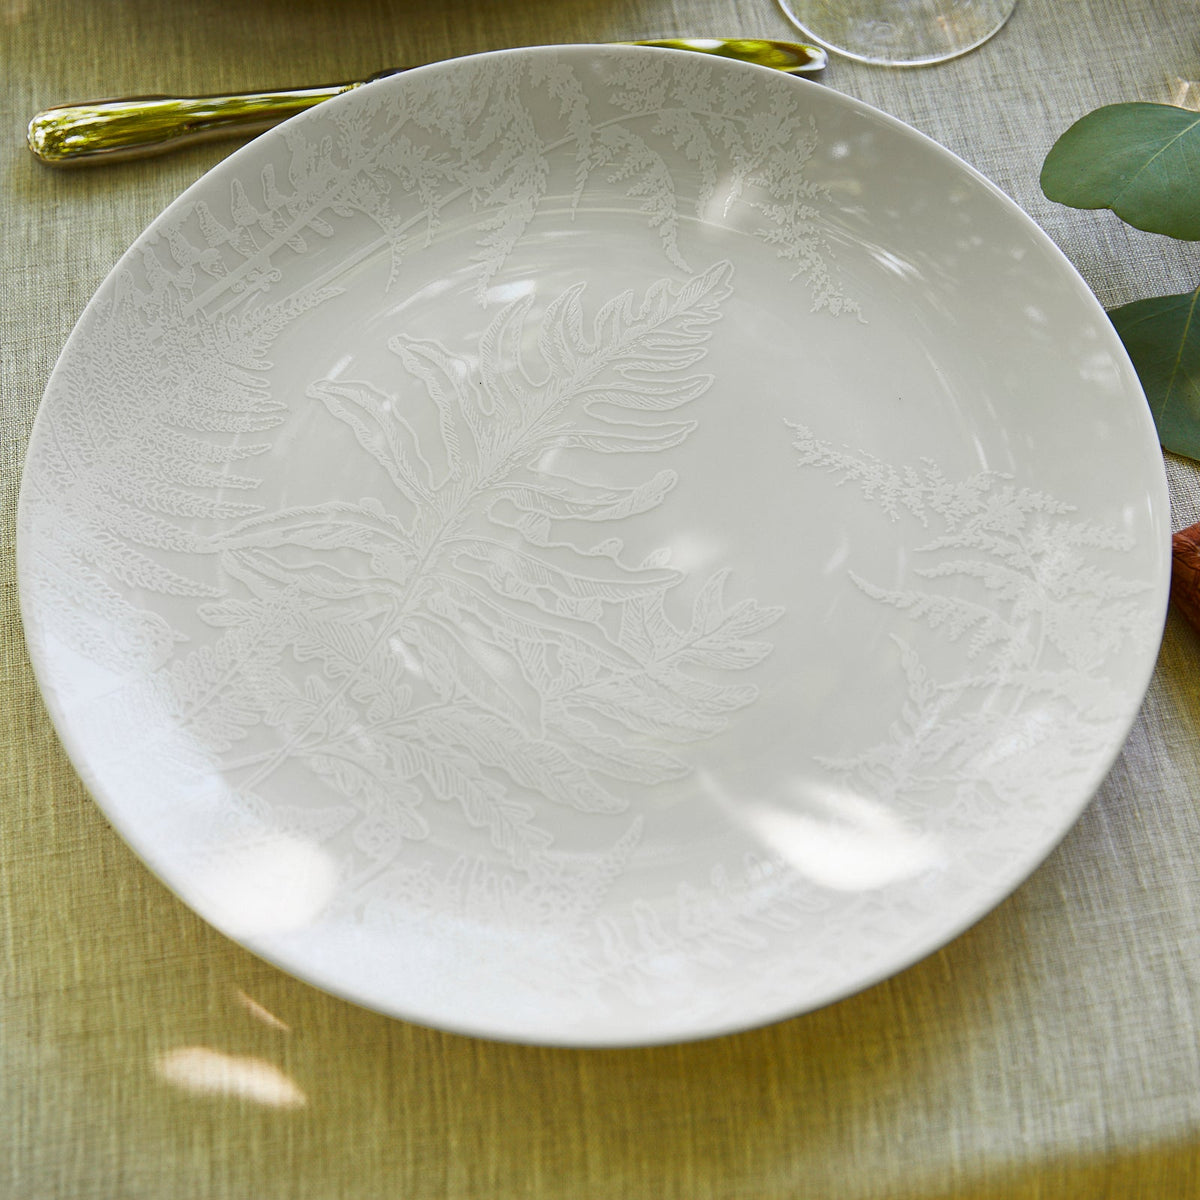 A Caskata Spring Coupe Platter adorned with delicate botanical imagery, evoking the ethereal beauty of Spring.